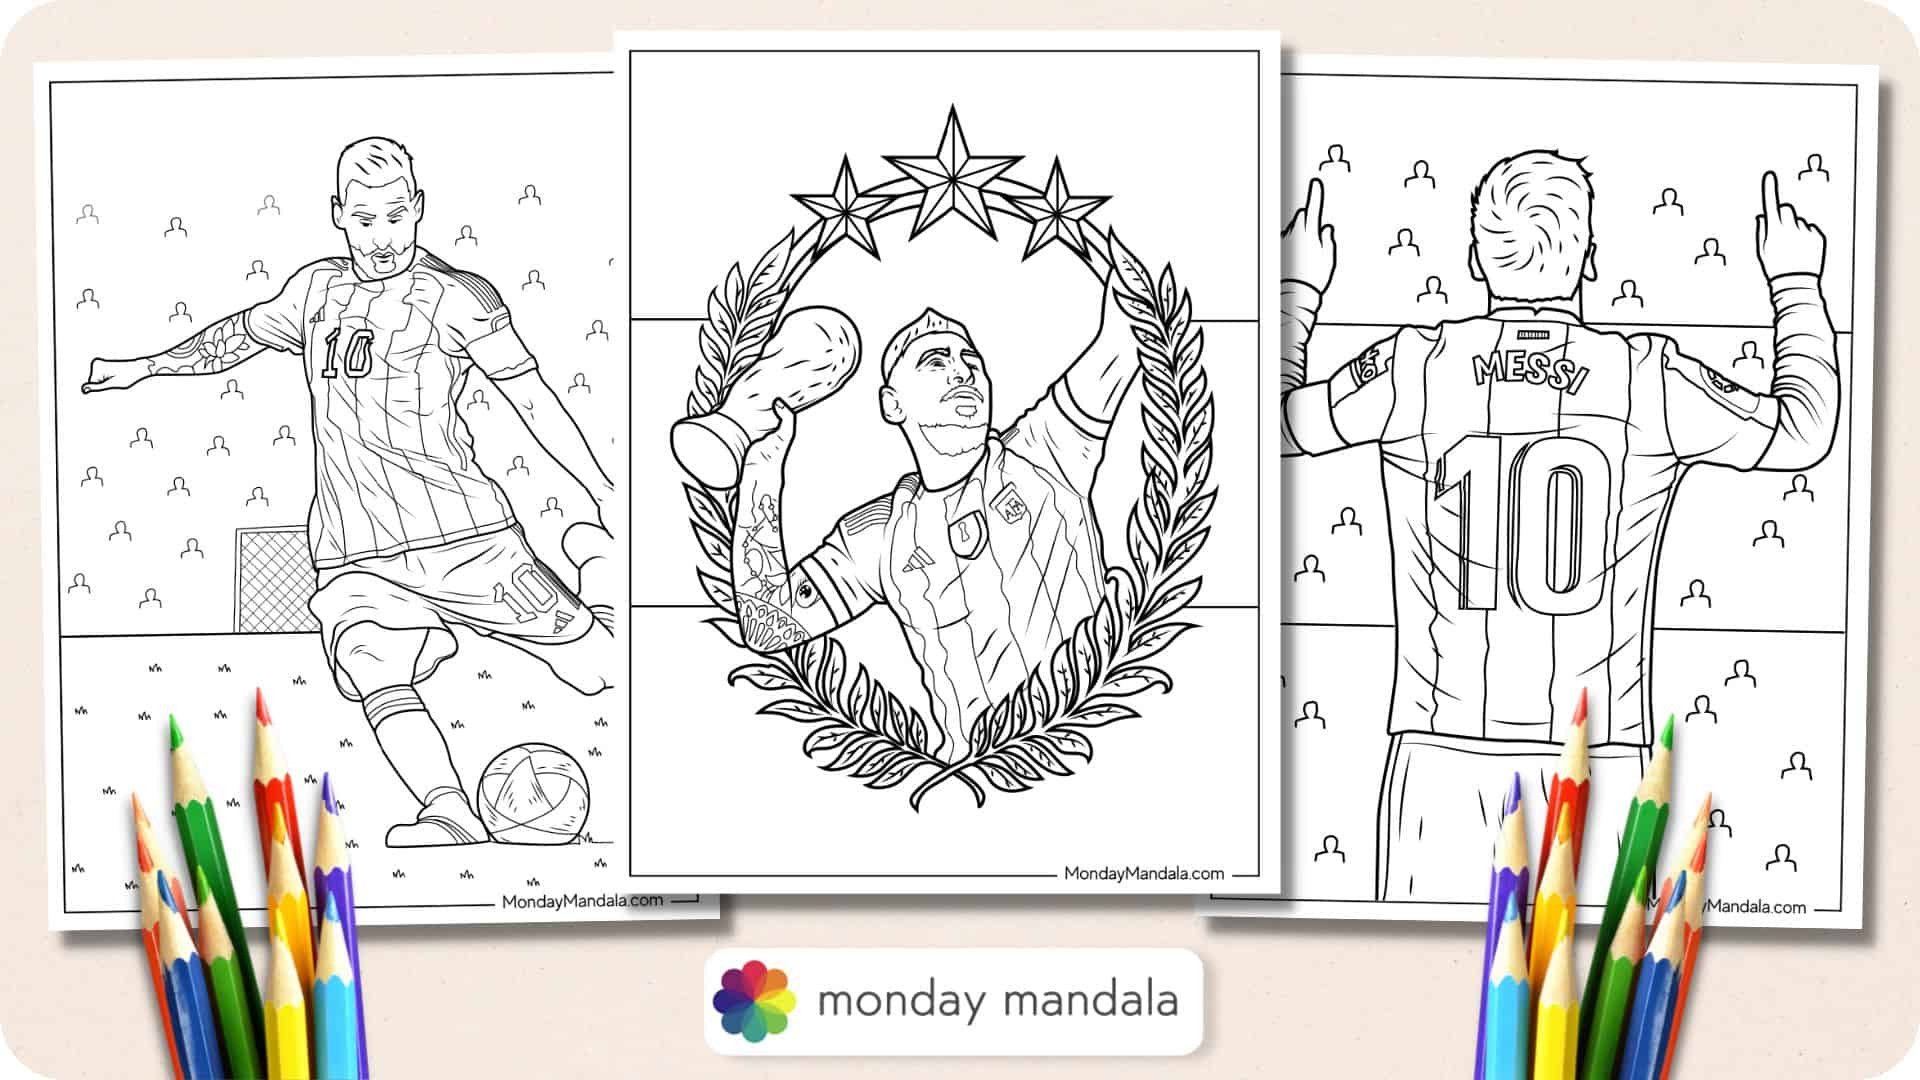 Lionel messi coloring pages free pdf printables